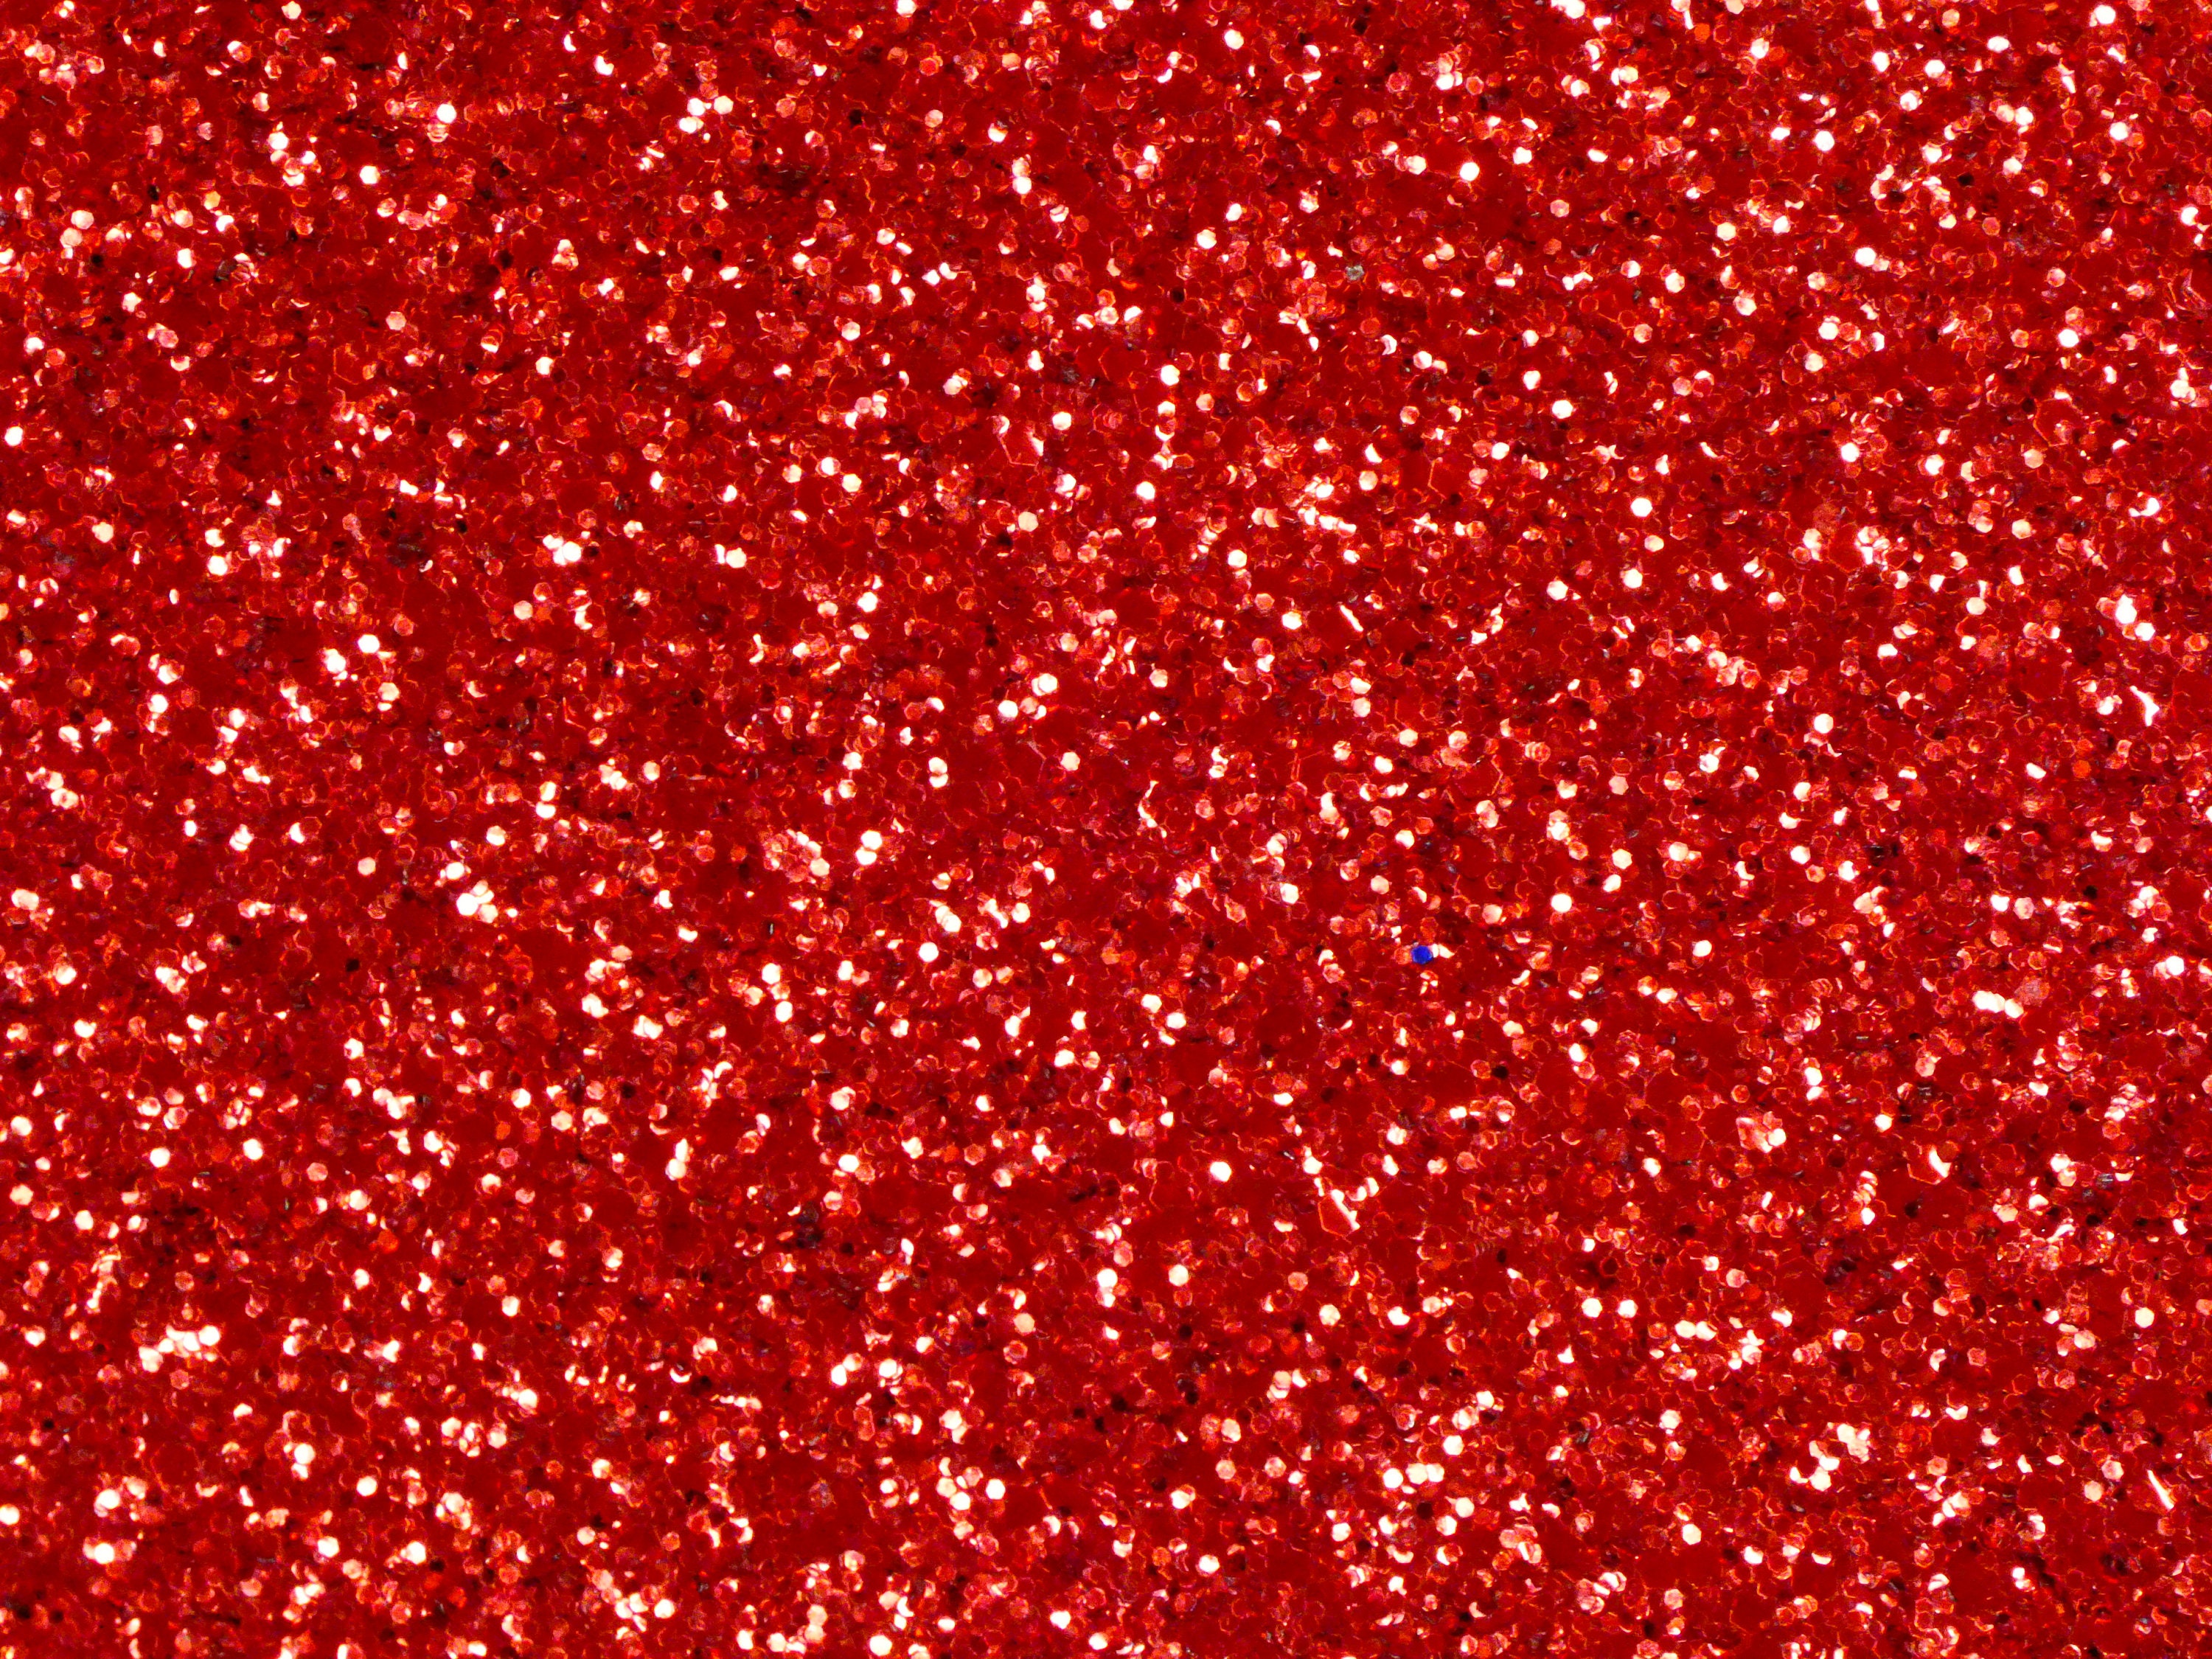 Chunky Glitter 5x11 RED Metallic Fabric applied to Leather 4